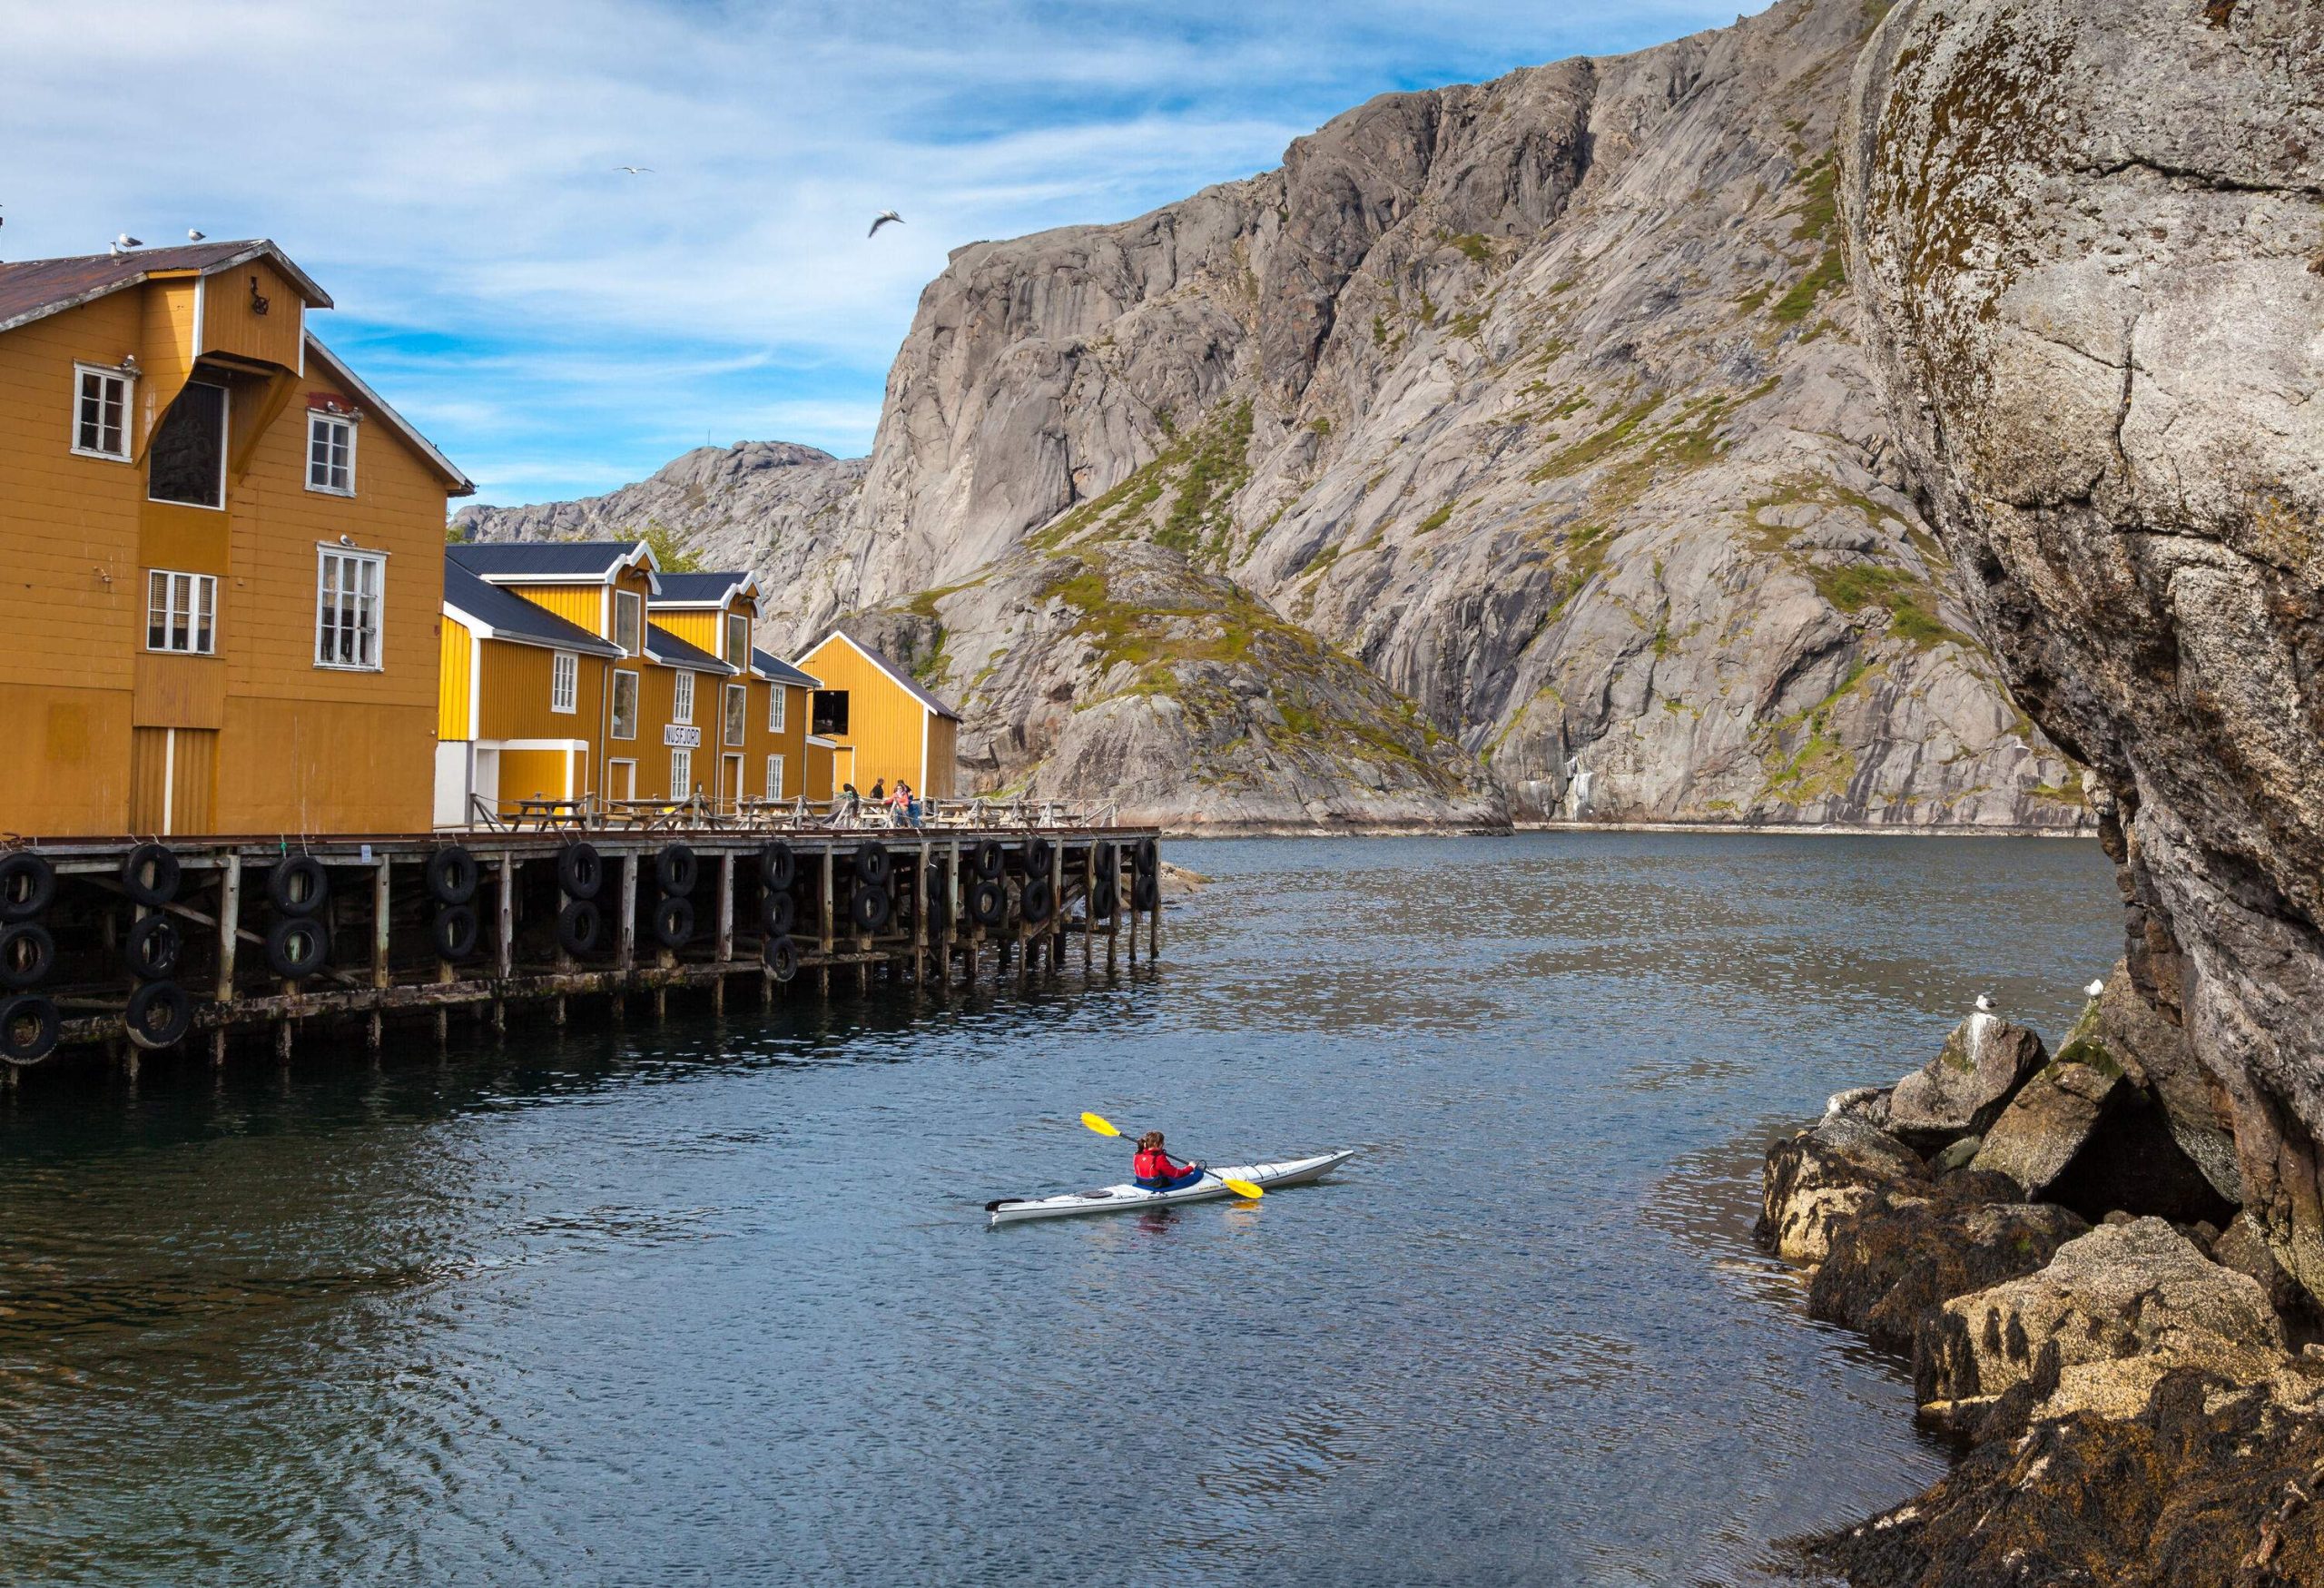 A man paddling a kayak in a fjord along a tranquil yellow fishing village bounded by steep rock mountains.